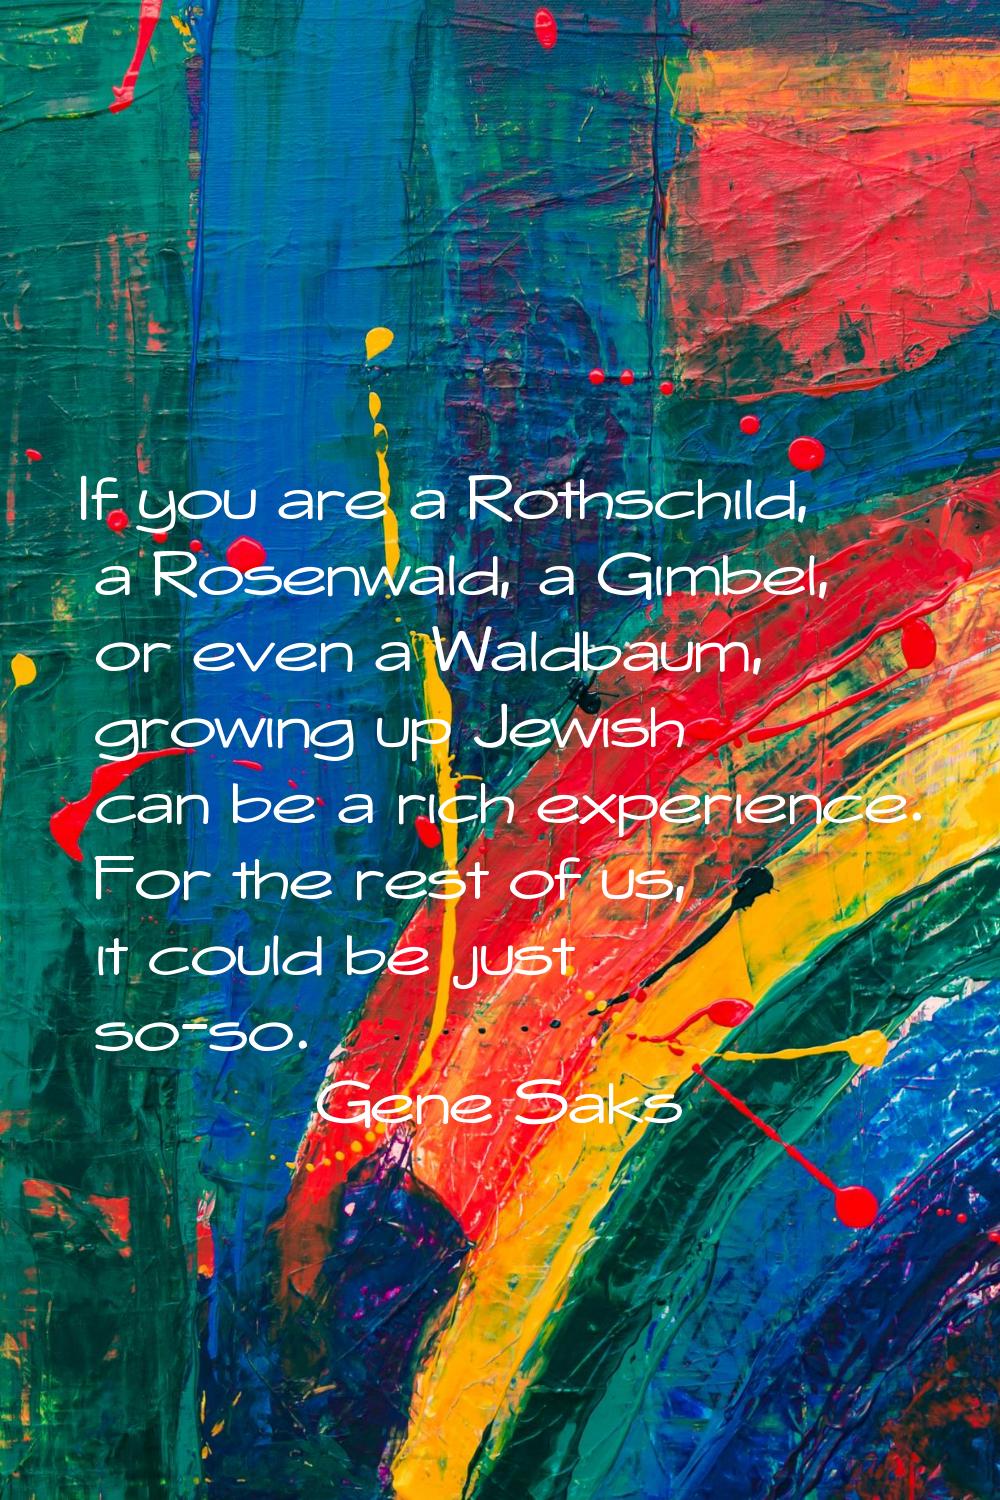 If you are a Rothschild, a Rosenwald, a Gimbel, or even a Waldbaum, growing up Jewish can be a rich